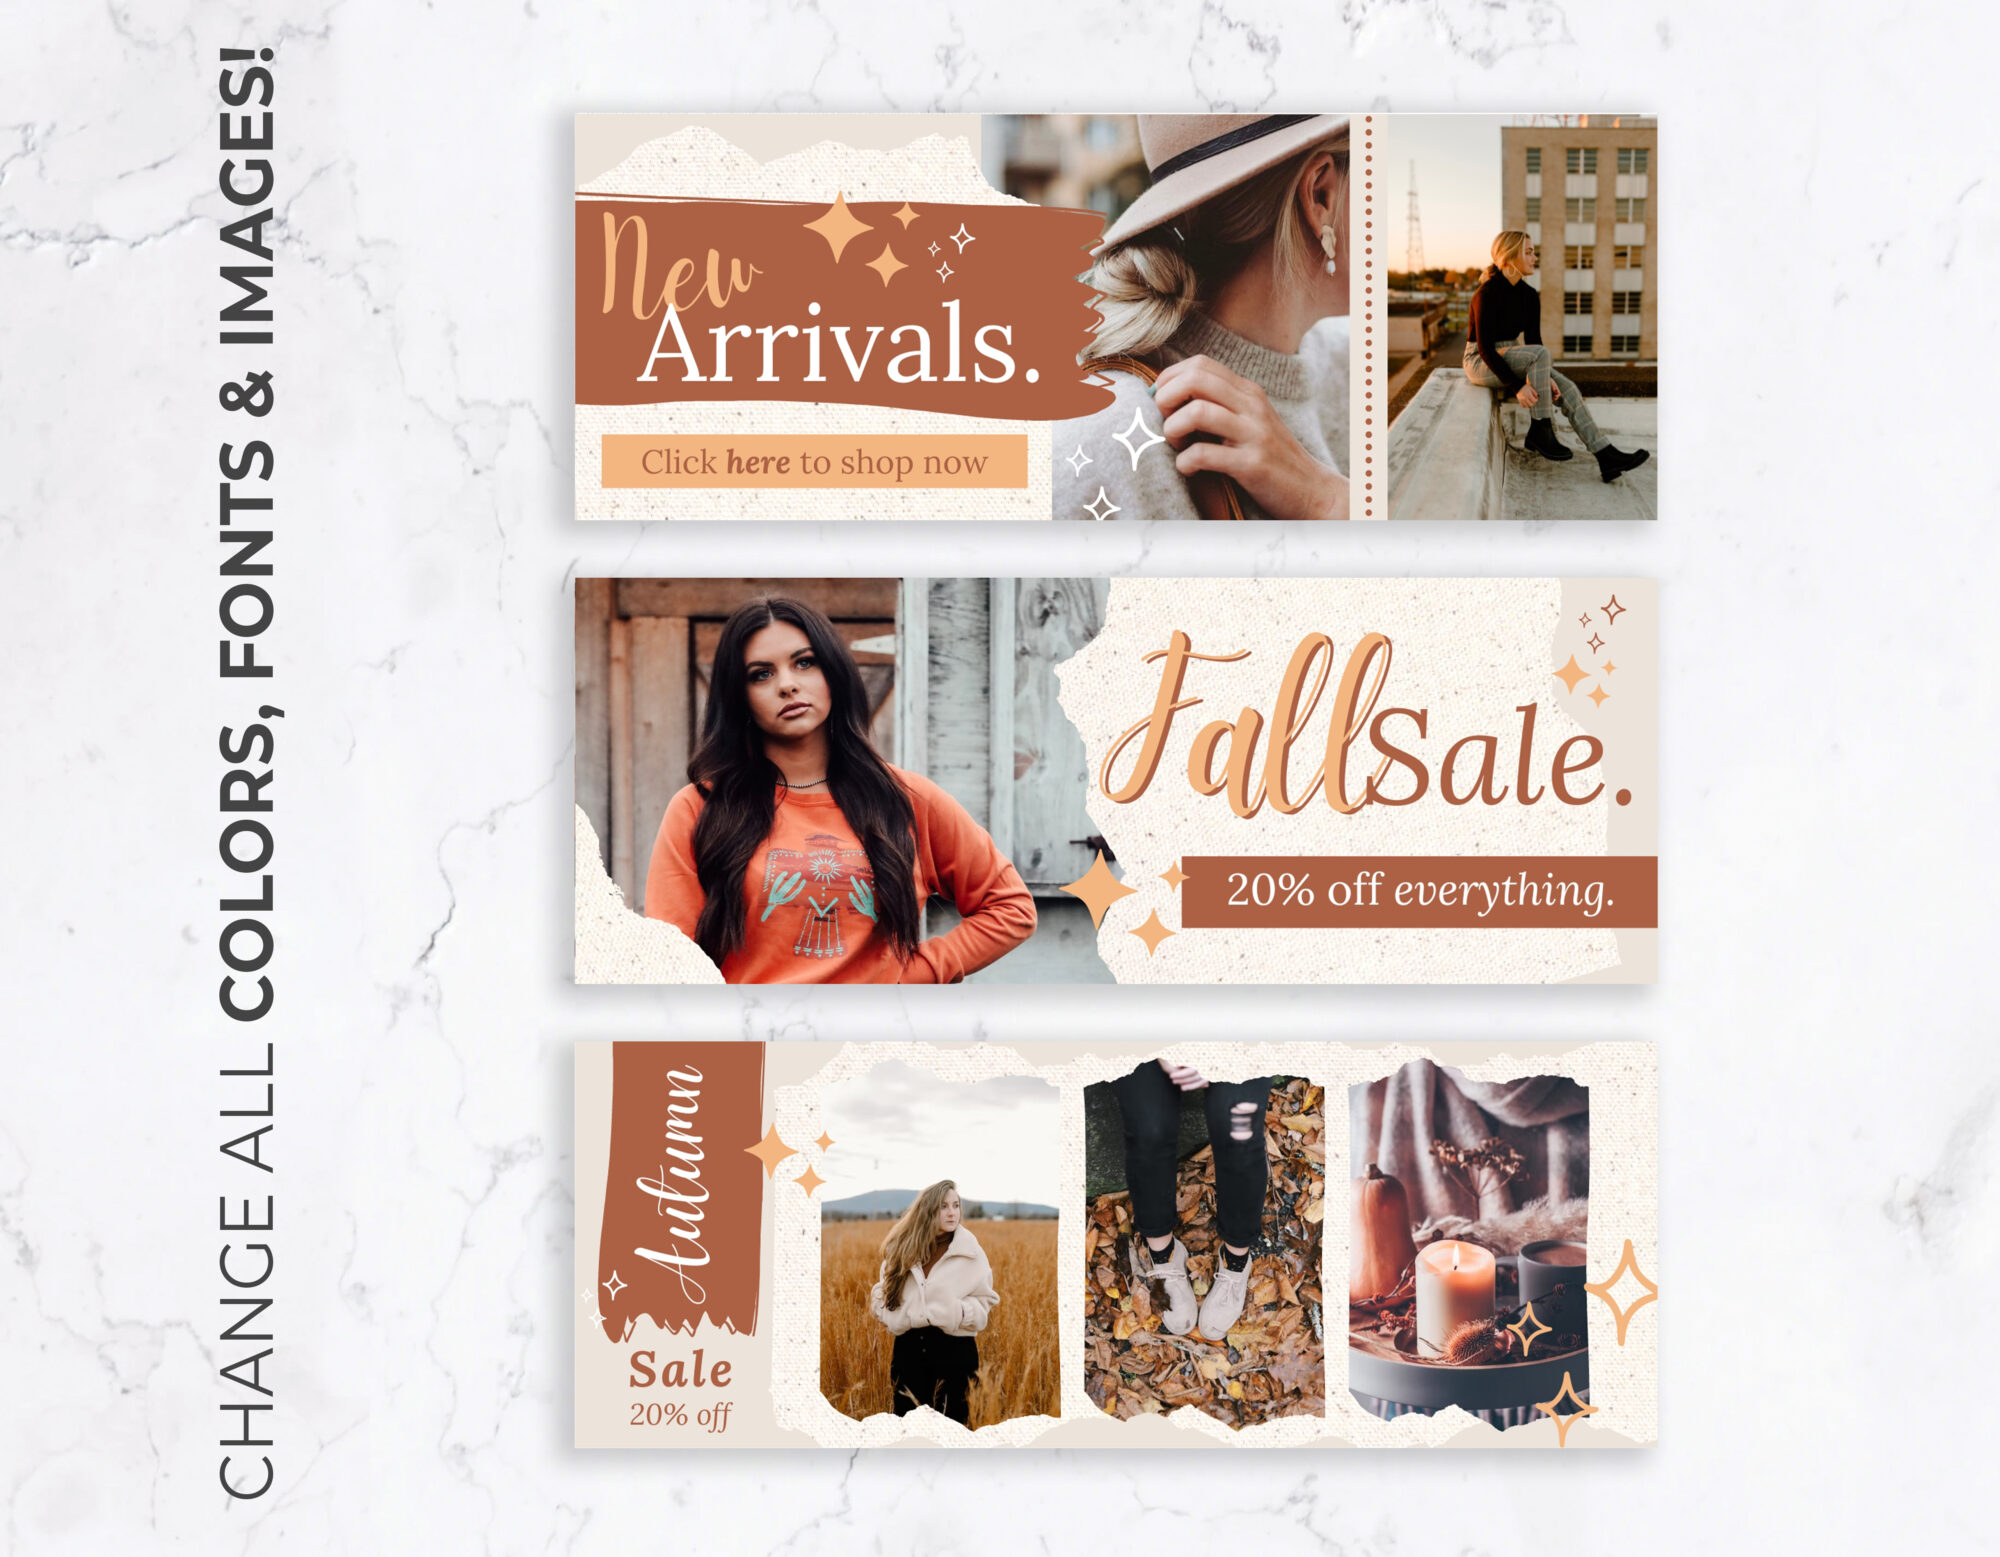 Website Banner Templates for Canva – Fall Edition